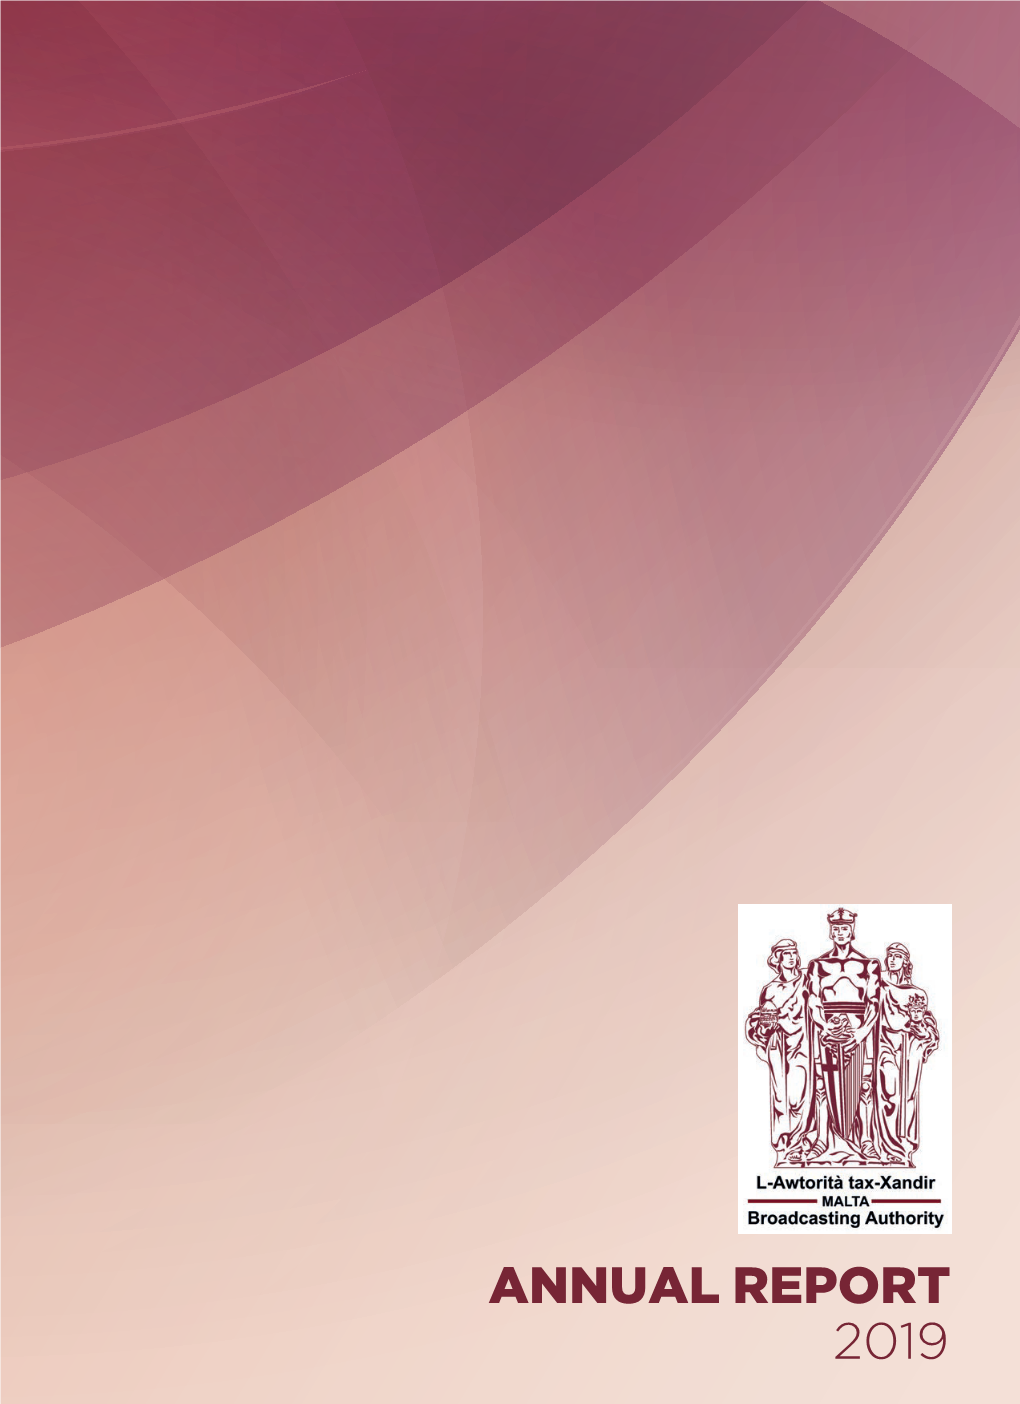 ANNUAL REPORT 2019 Published in 2020 by the Broadcasting Authority 7 Mile End Road Ħamrun HMR 1719 Malta